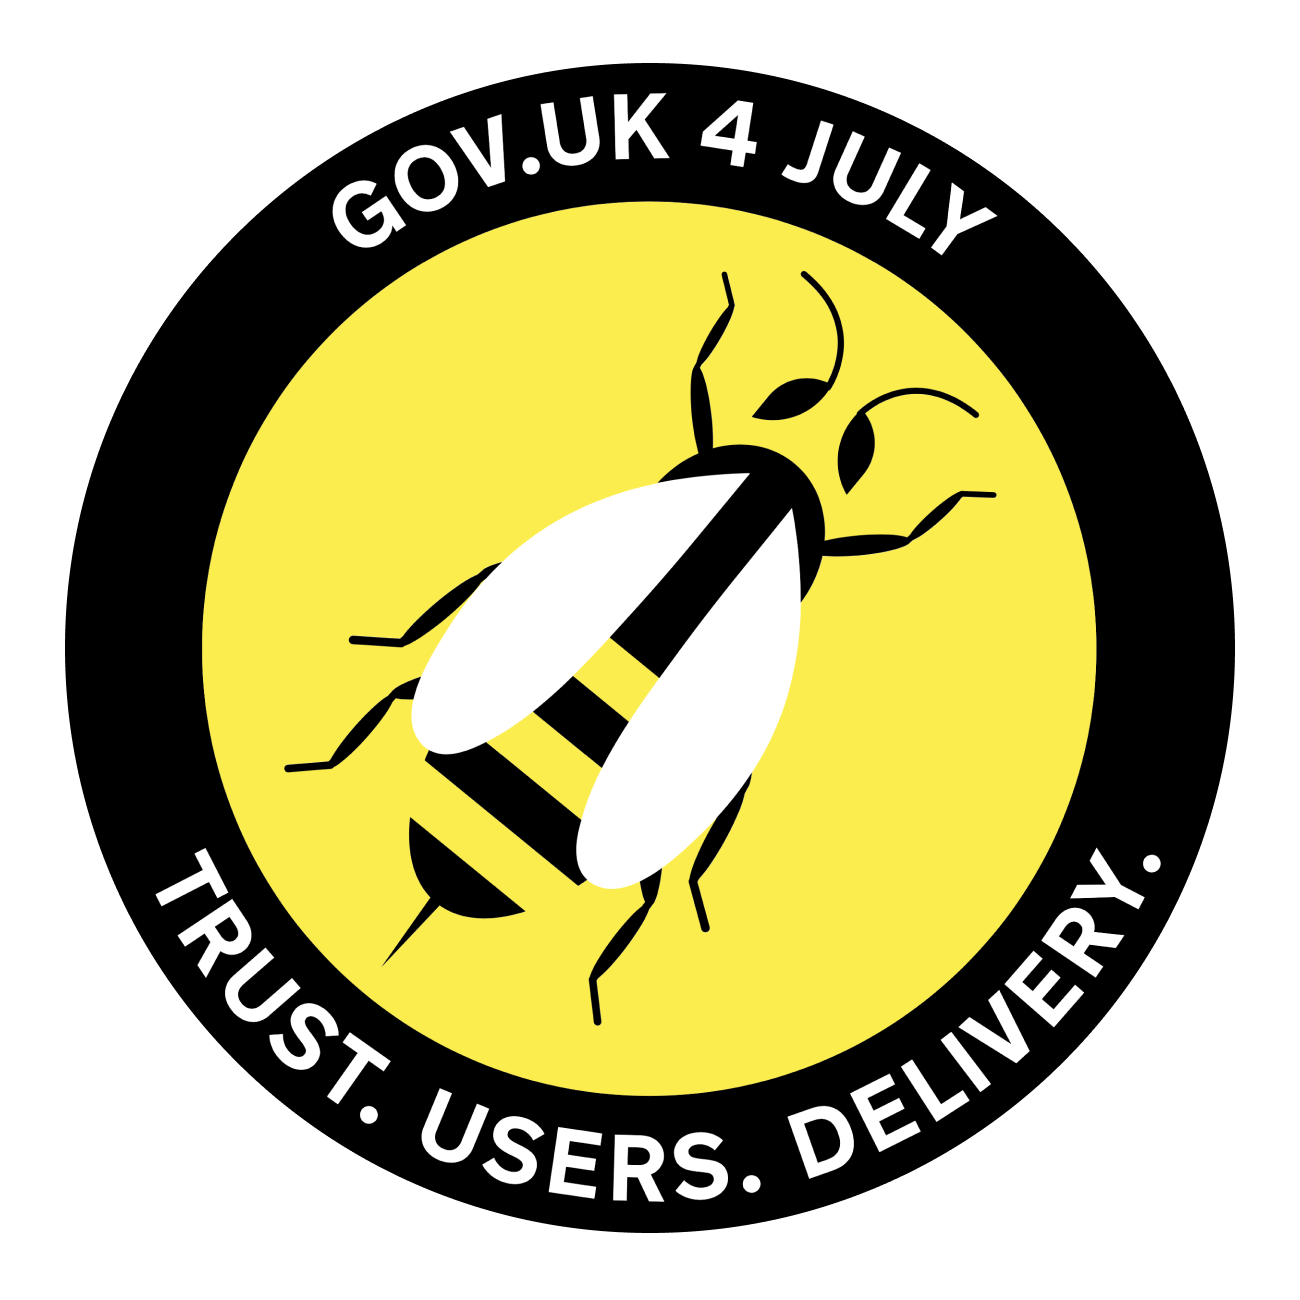 An illustrated mission patch for the GOV.UK Beta launch on 4th July 2012, showing a bee on a yellow background